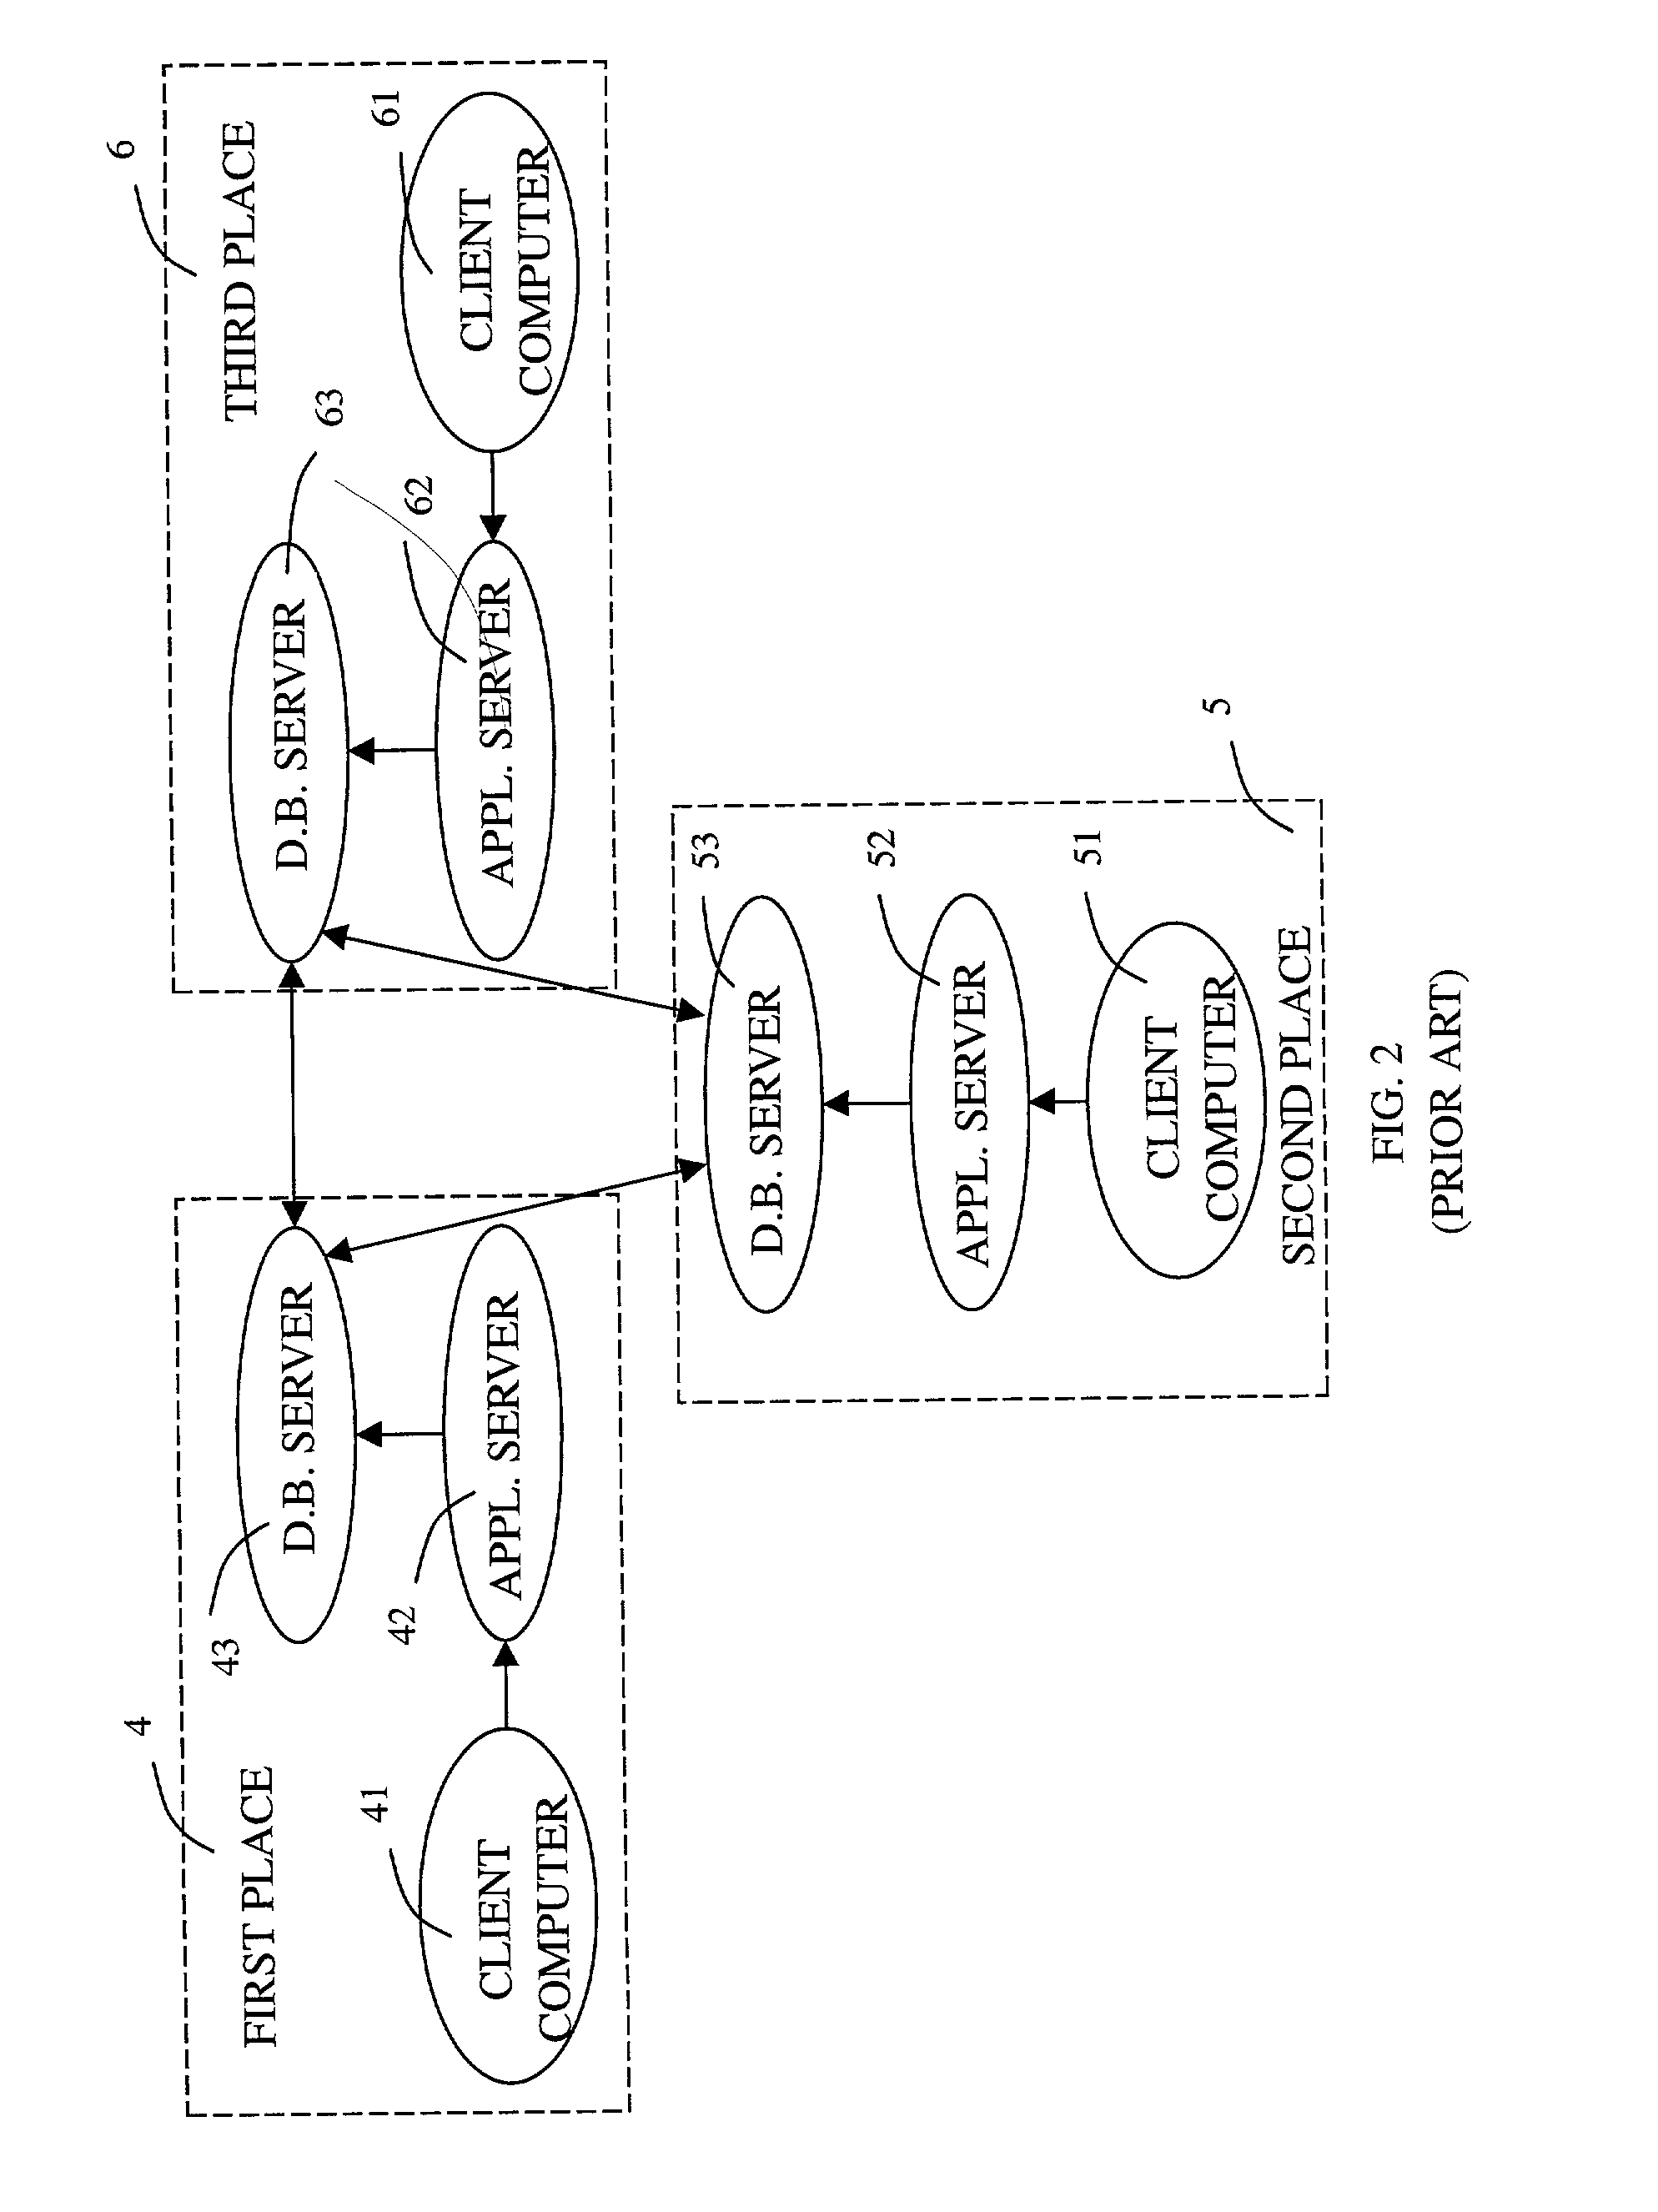 System and method for managing distributed files